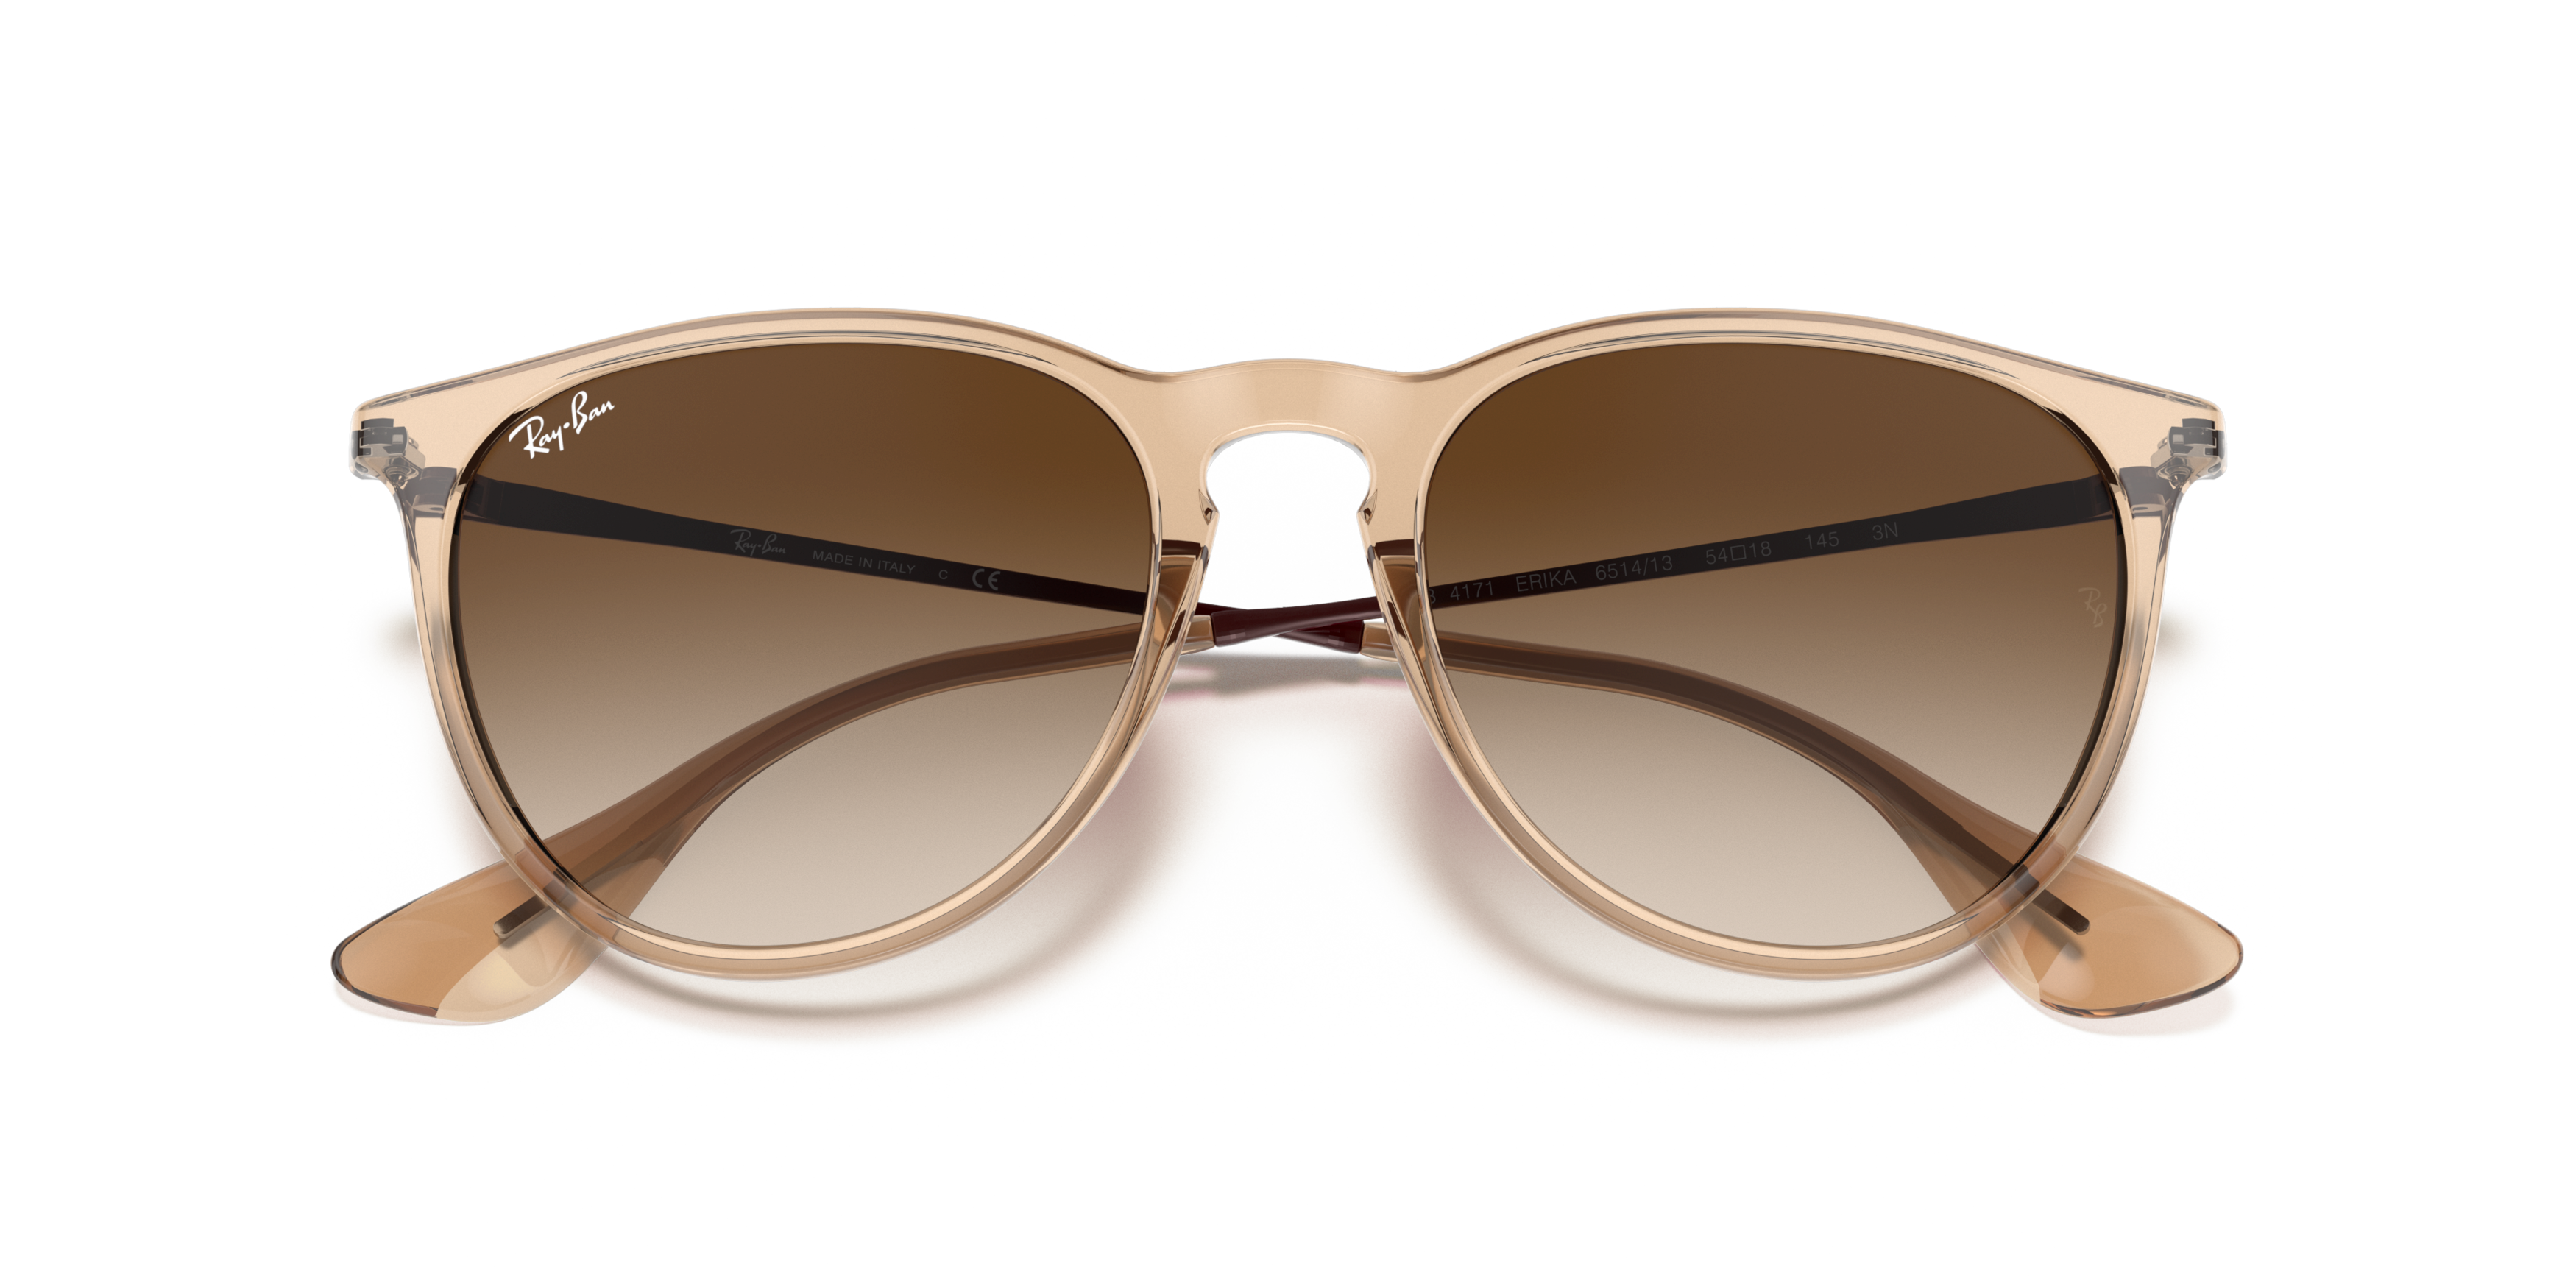 Folded Ray-Ban Erika Color Mix RB 4171 (651413) Sunglasses Brown / Transparent, Brown